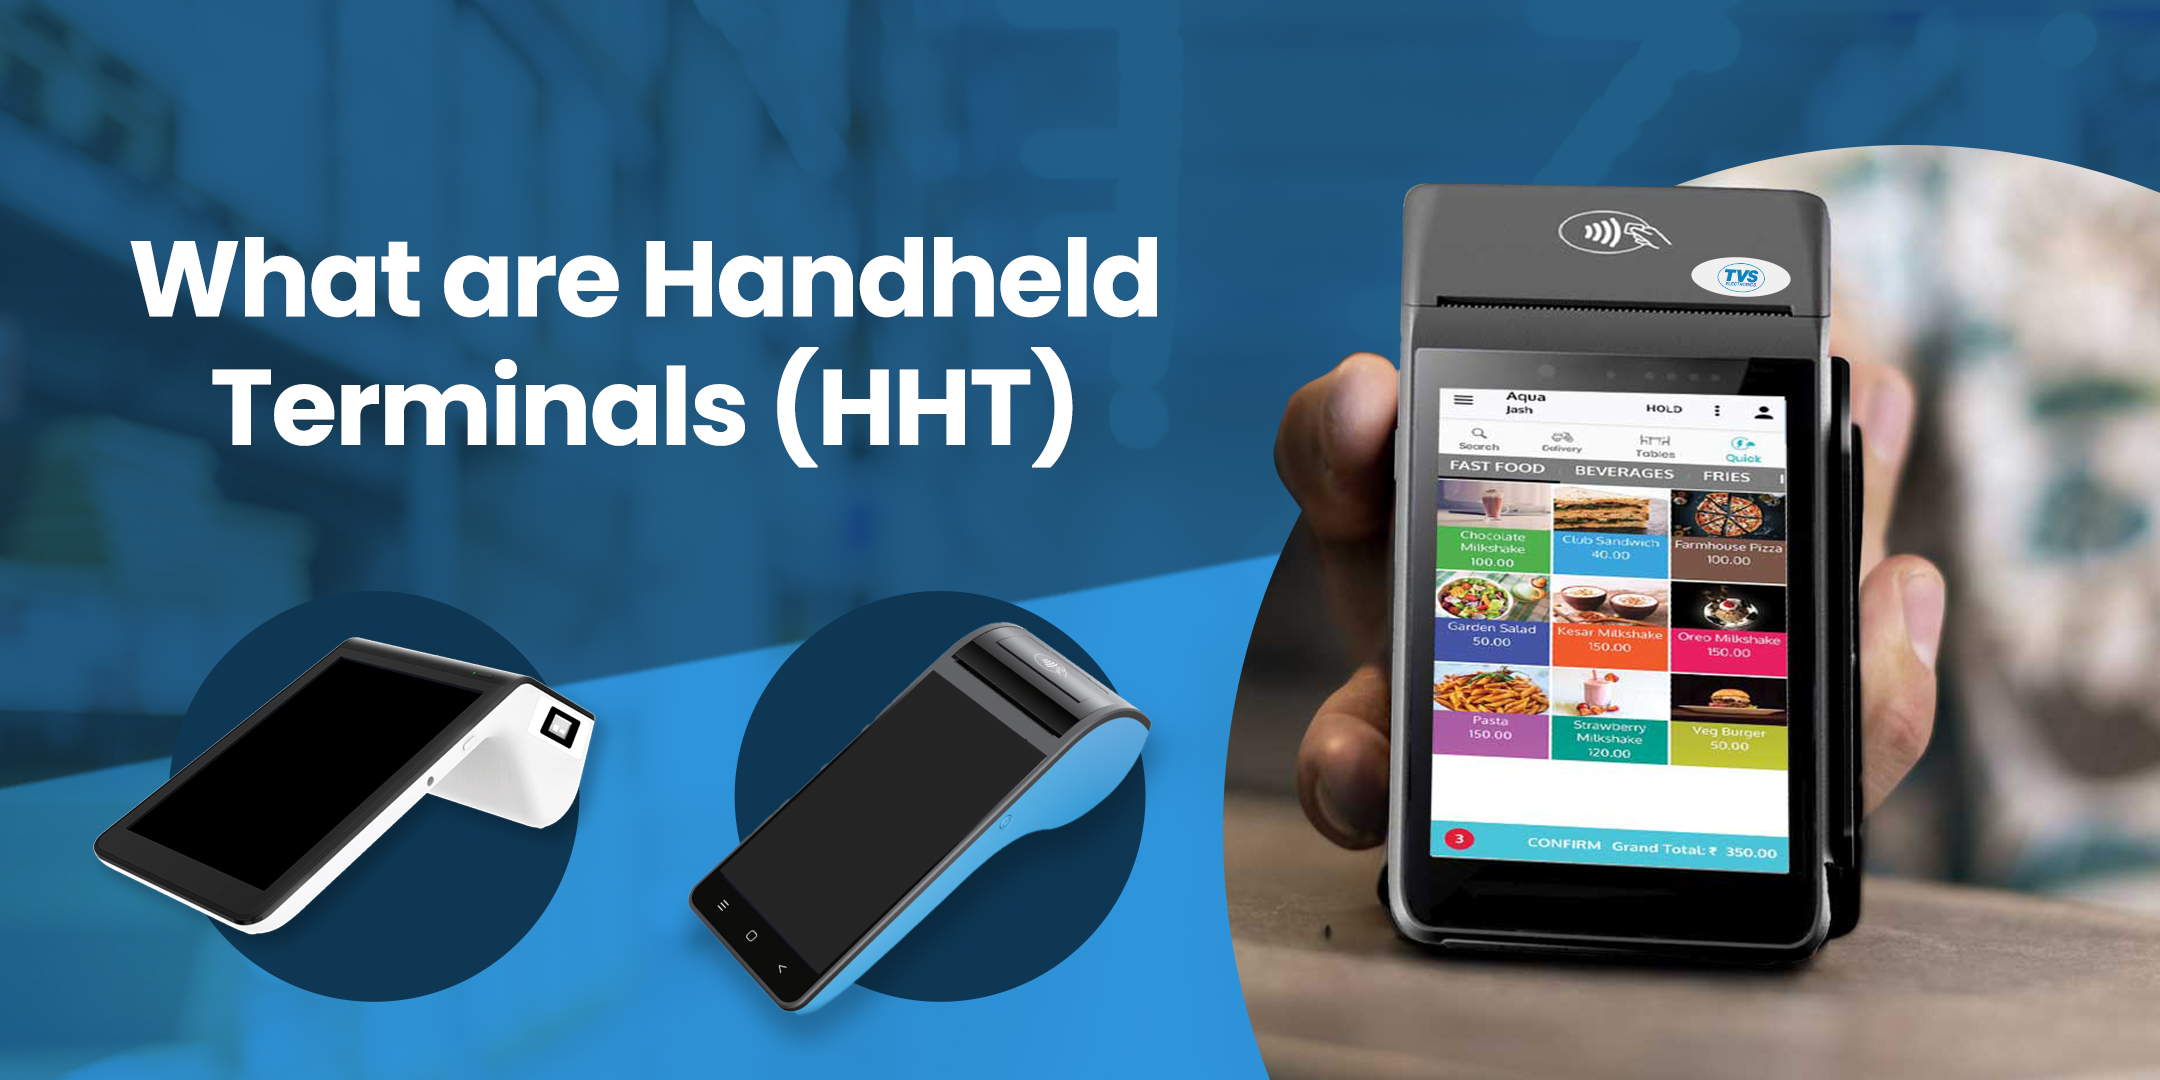 What are handheld terminals (HHT)?